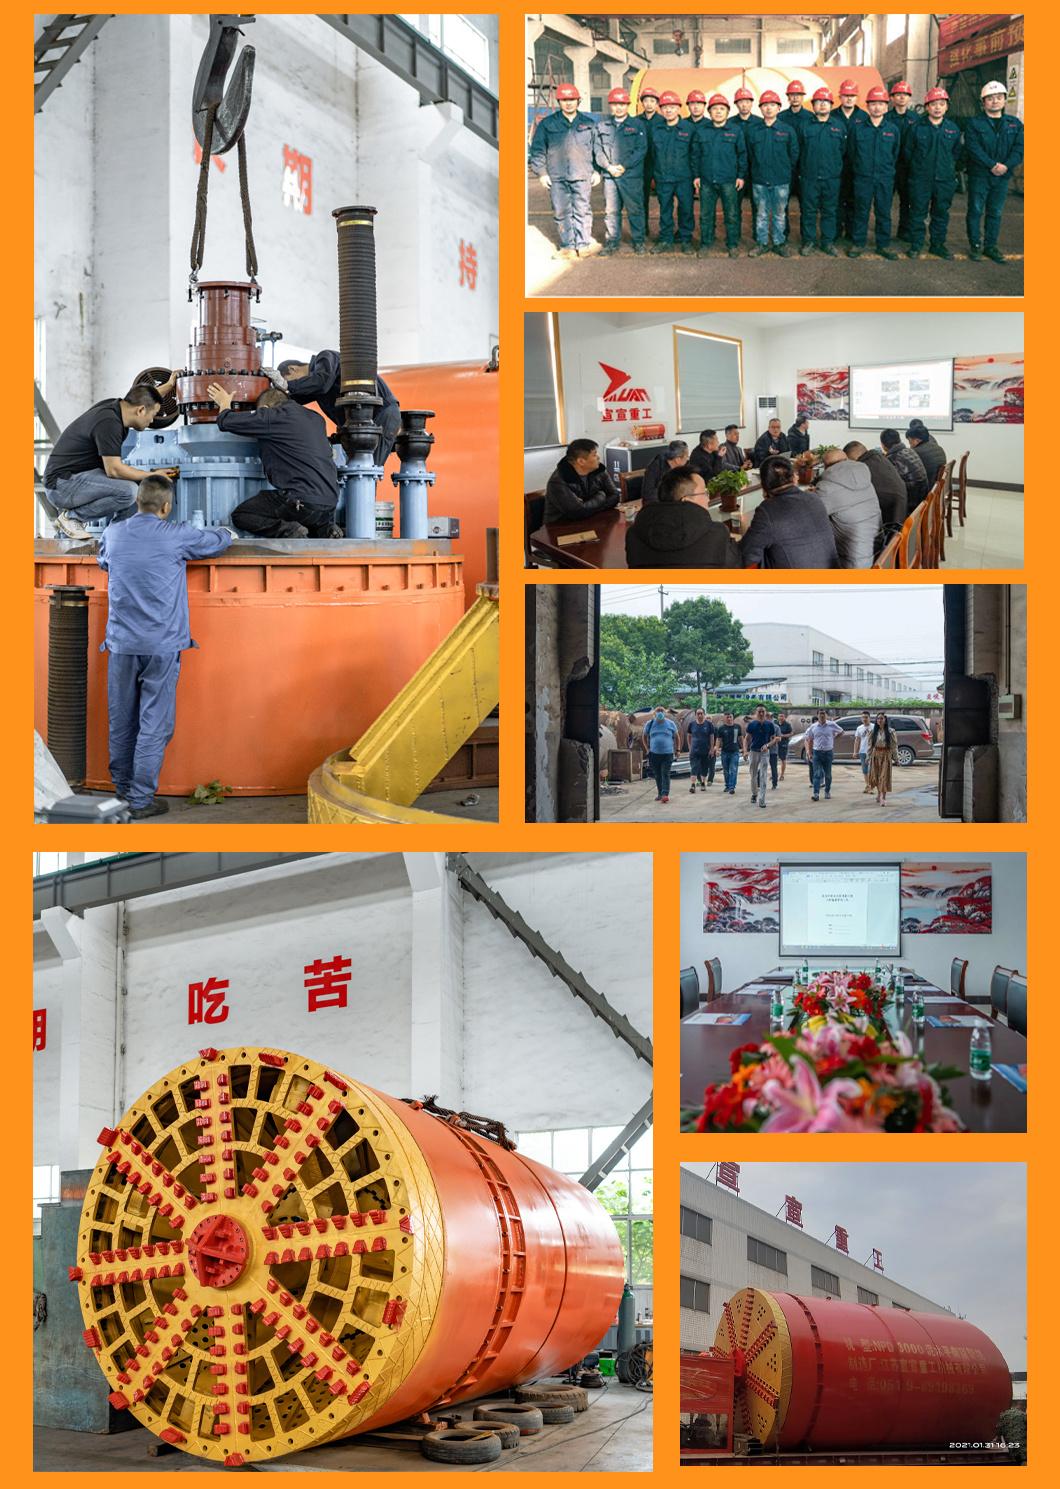 Reliable Trenchless Project Ysd3000/1200 Rock Pipe Jacking Machine for Rcc